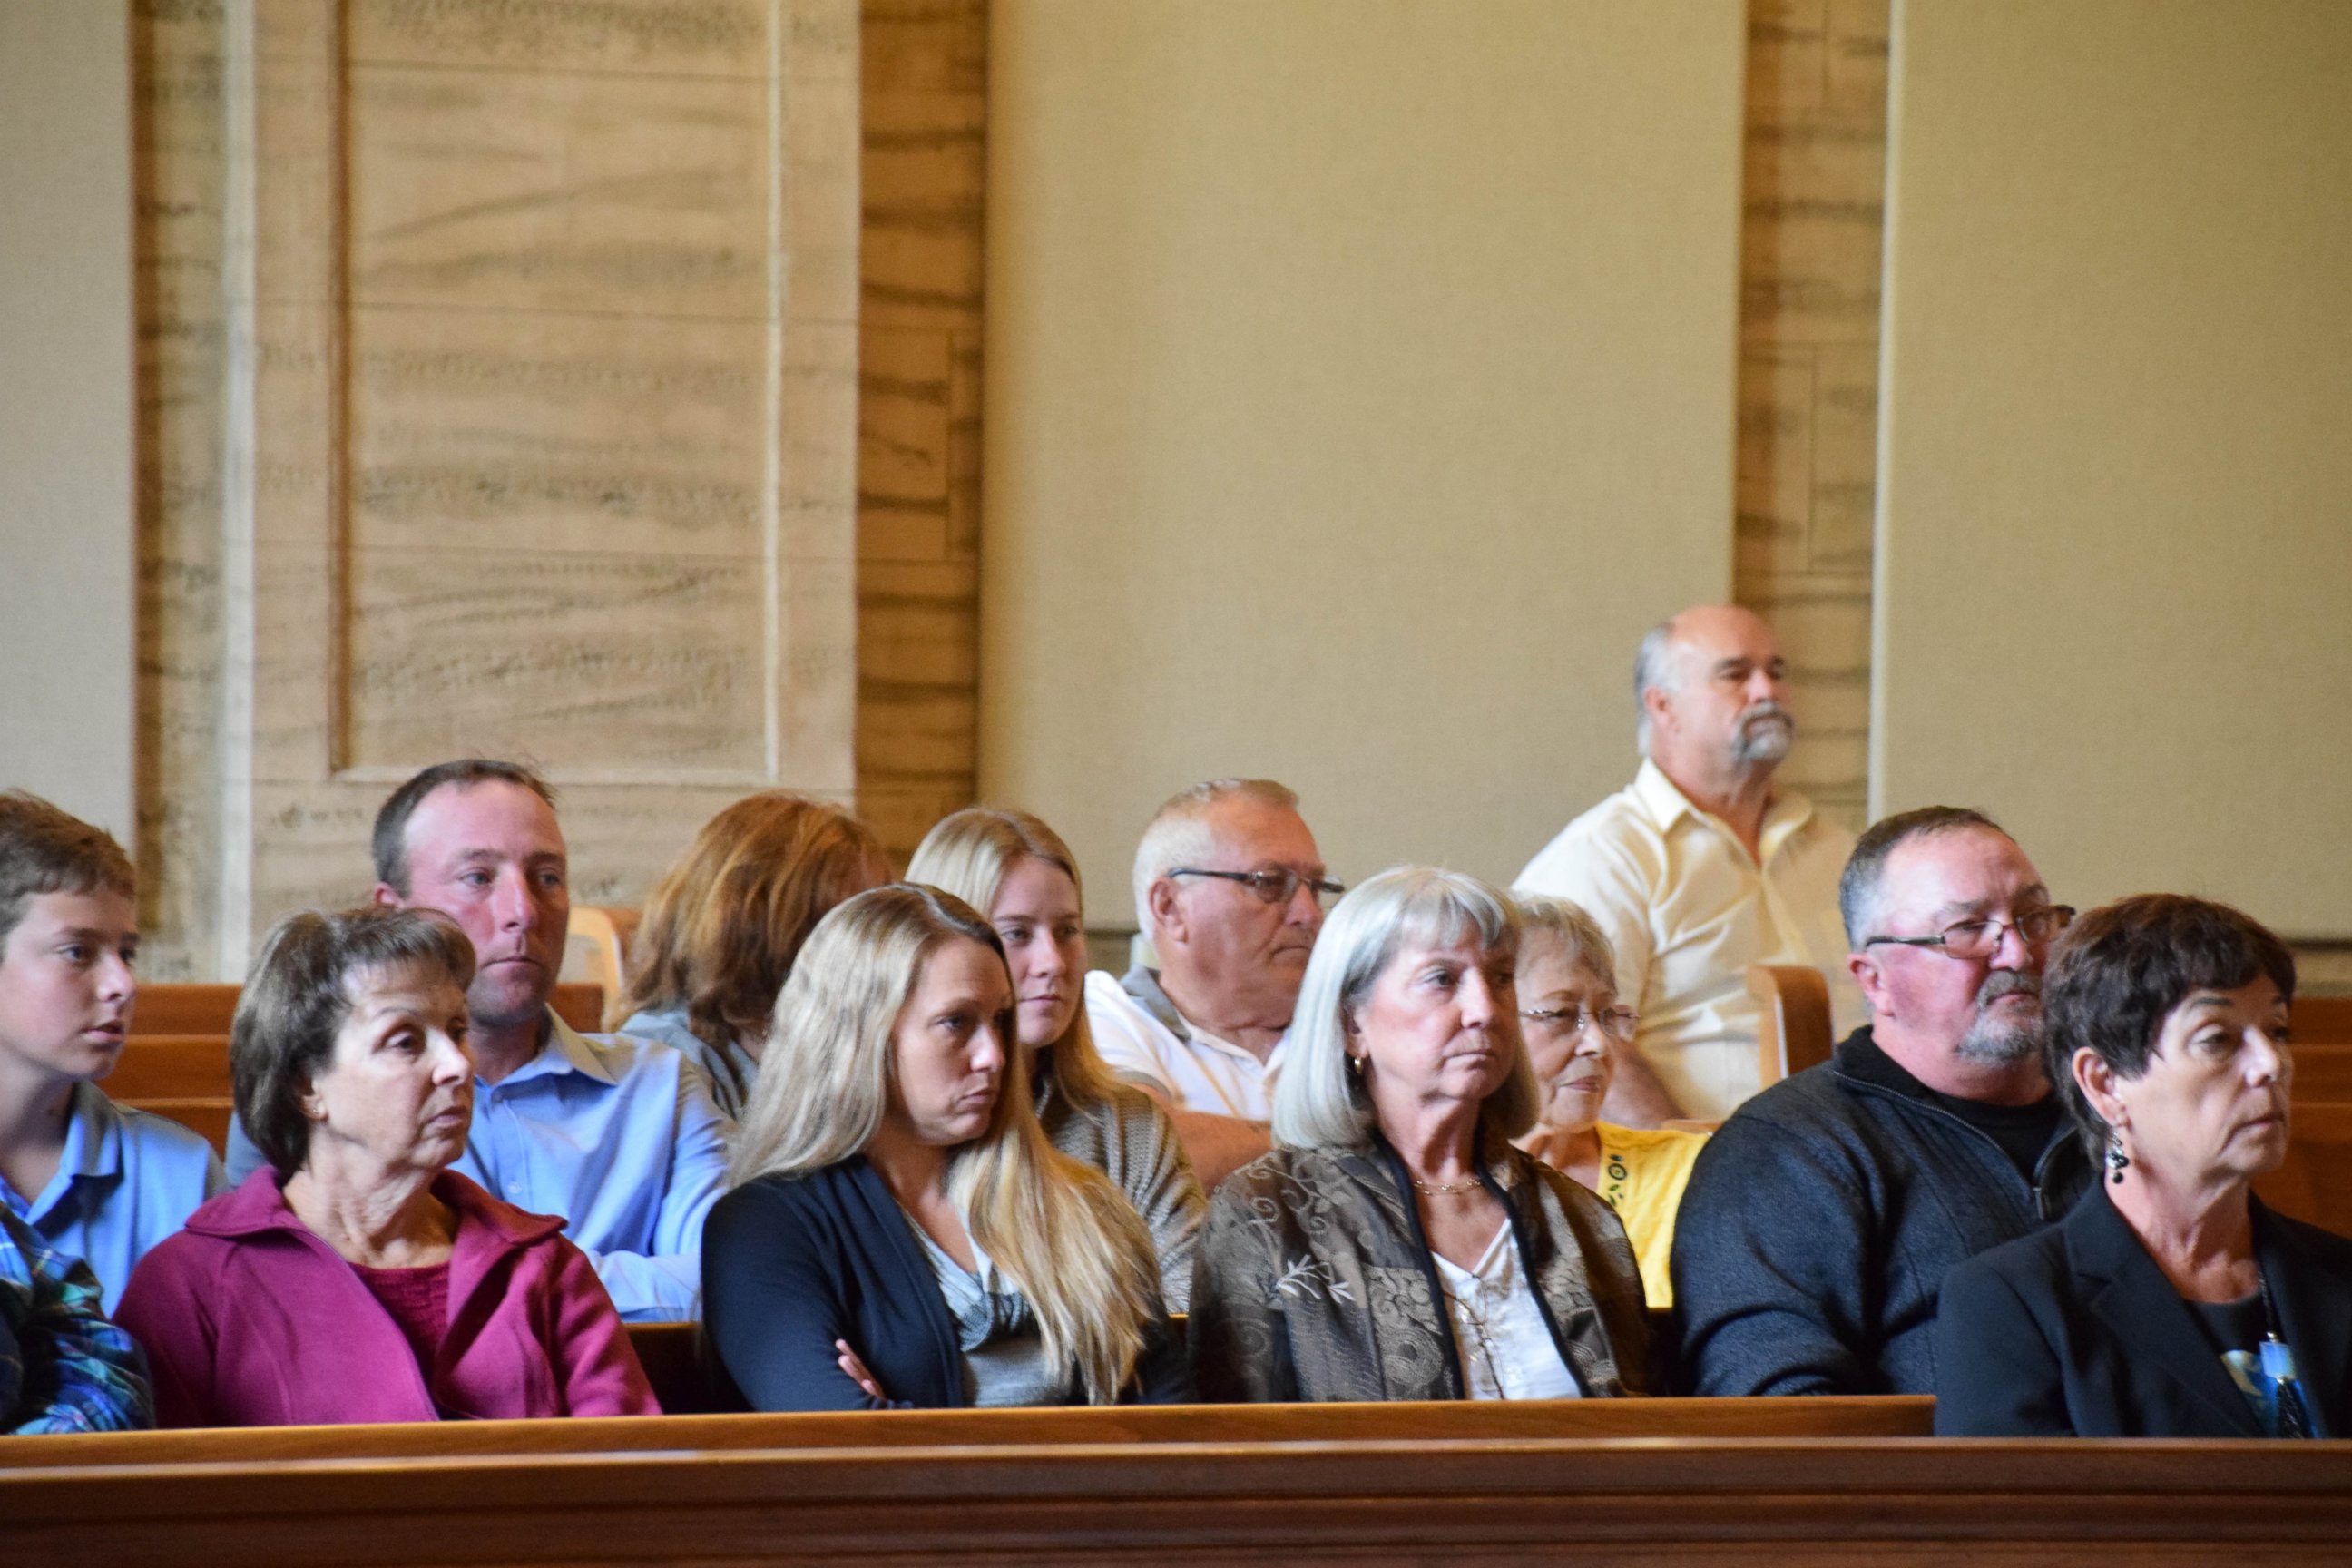 PHOTO: People watch the proceedings of the Nick Hillary trial at the St. Lawrence County Courthouse in Canton, New York.